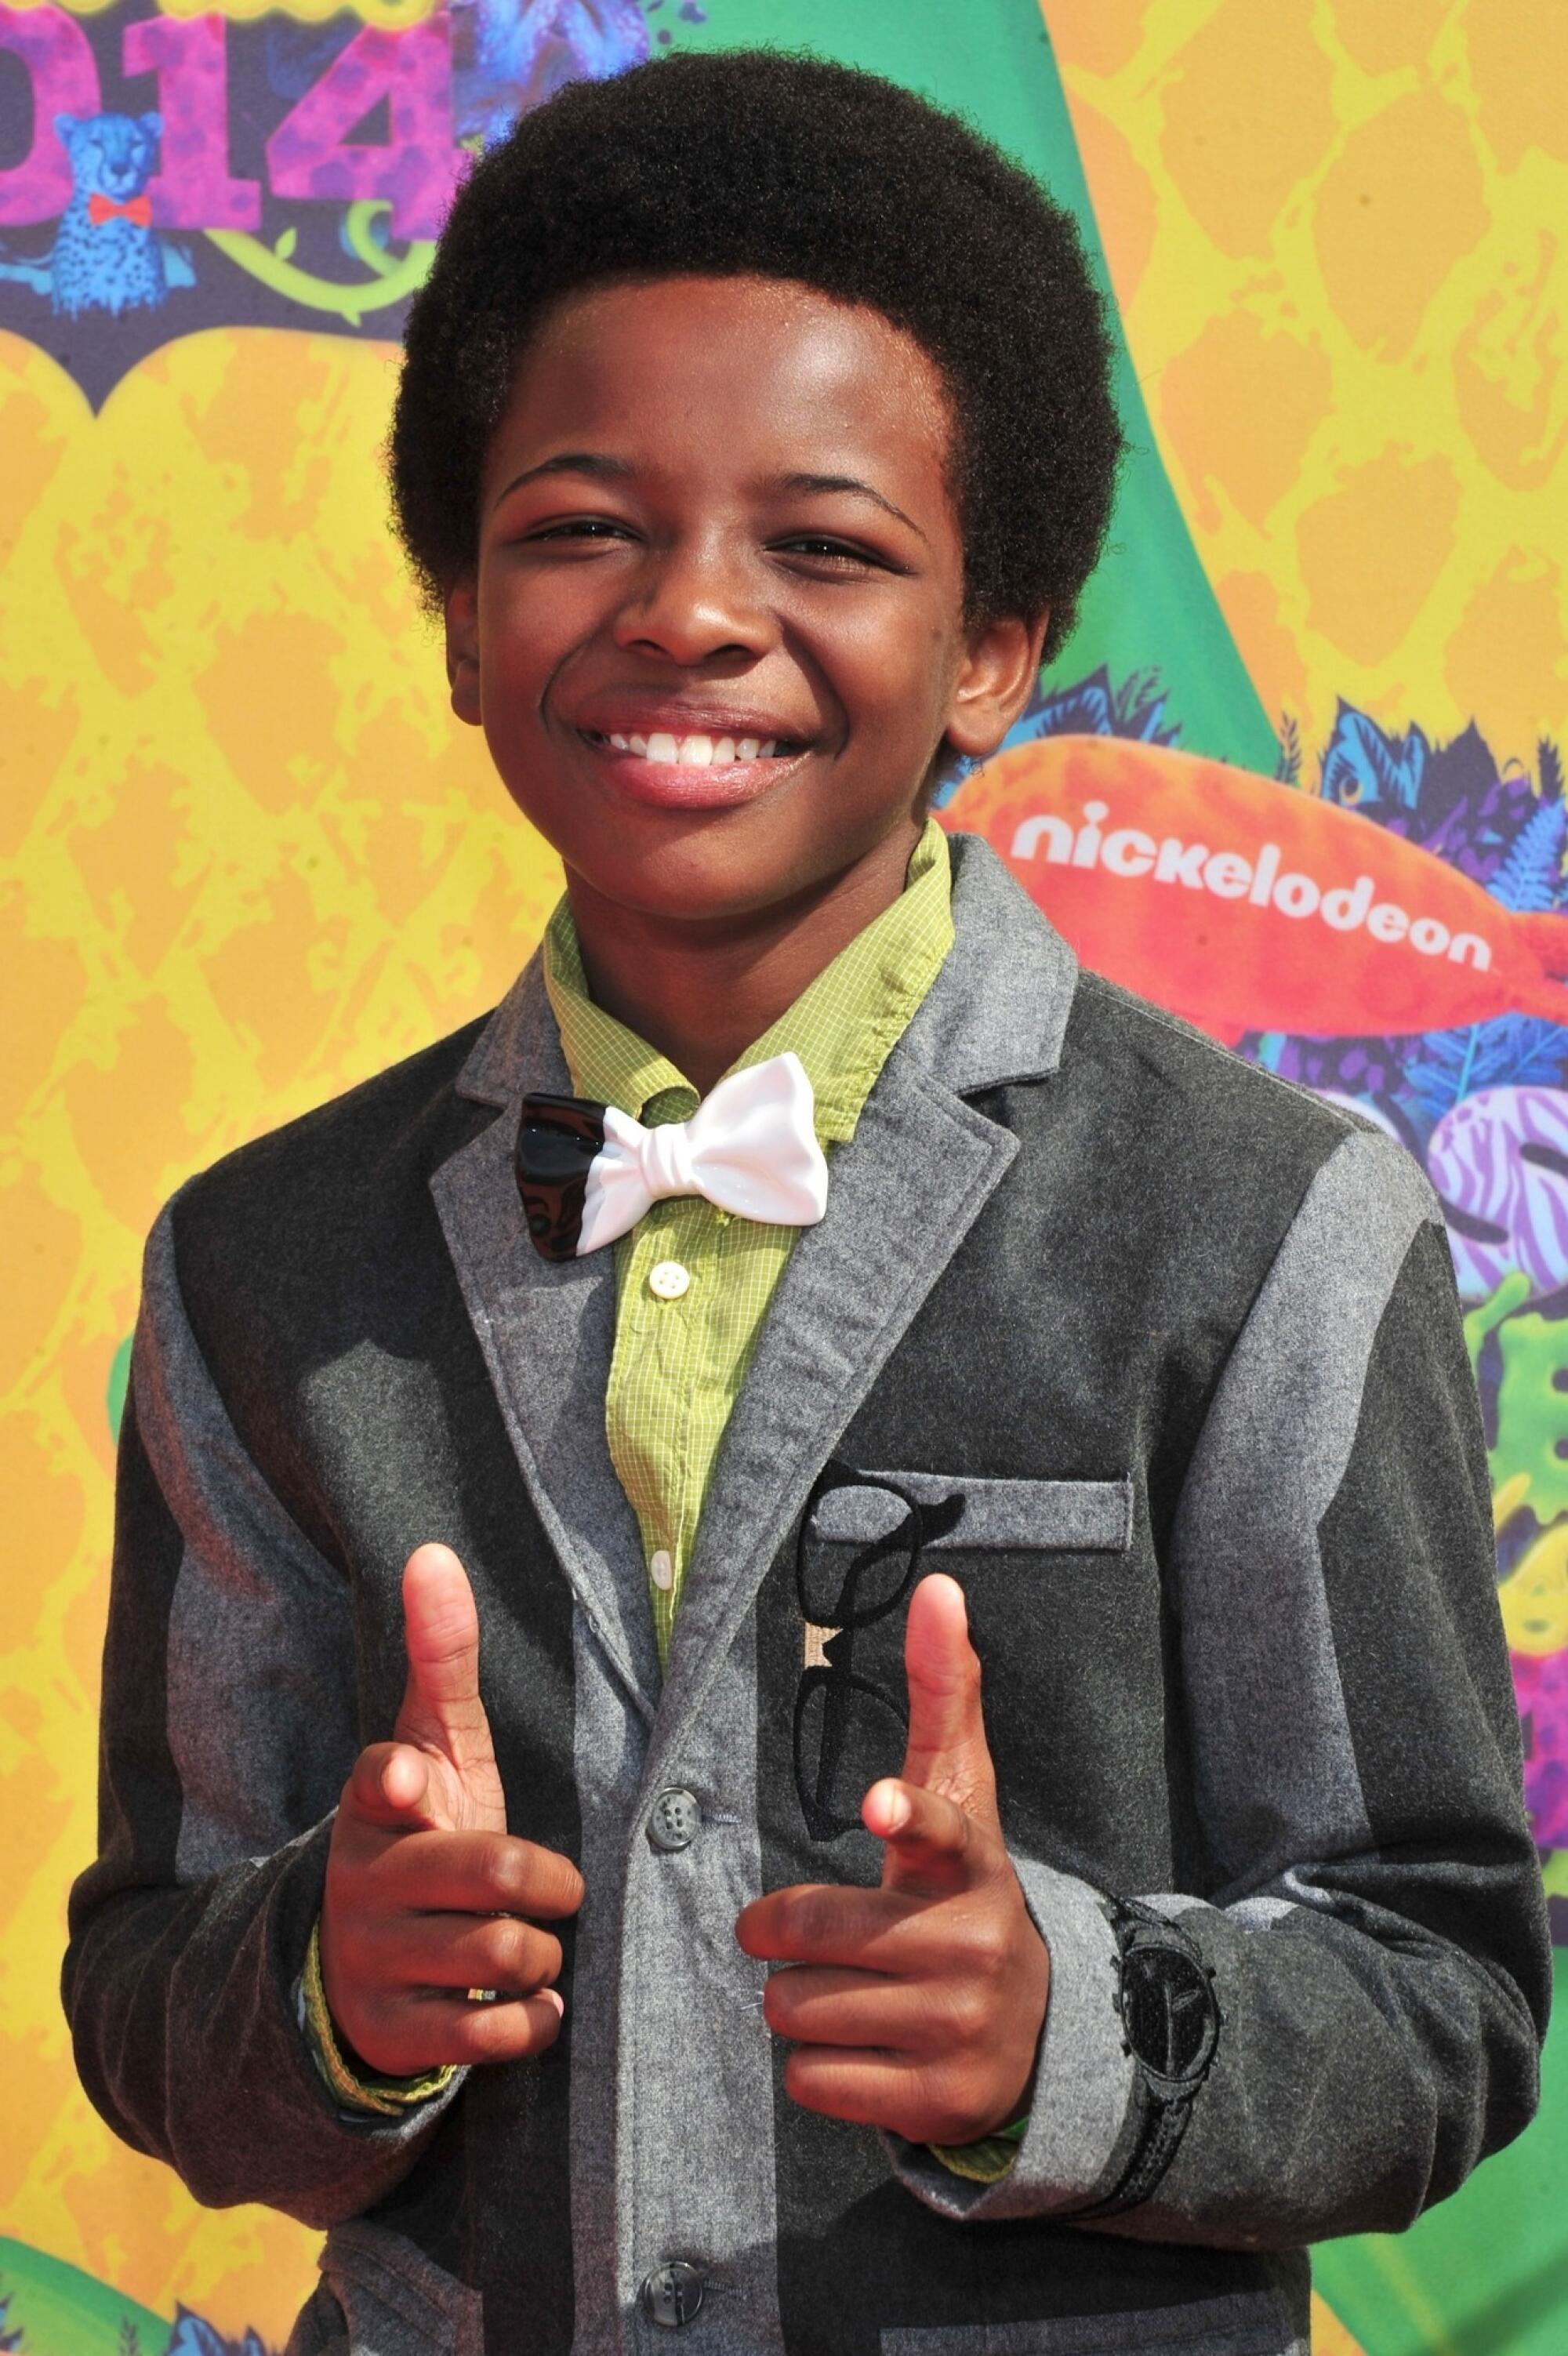 LACHSA student Dusan Brown, who has been acting since elementary school, at the Nickelodeon Kids' Choice Awards in 2014, which was the year he began voicing AJ in the Nick Jr. show "Blaze and the Monster Machines."